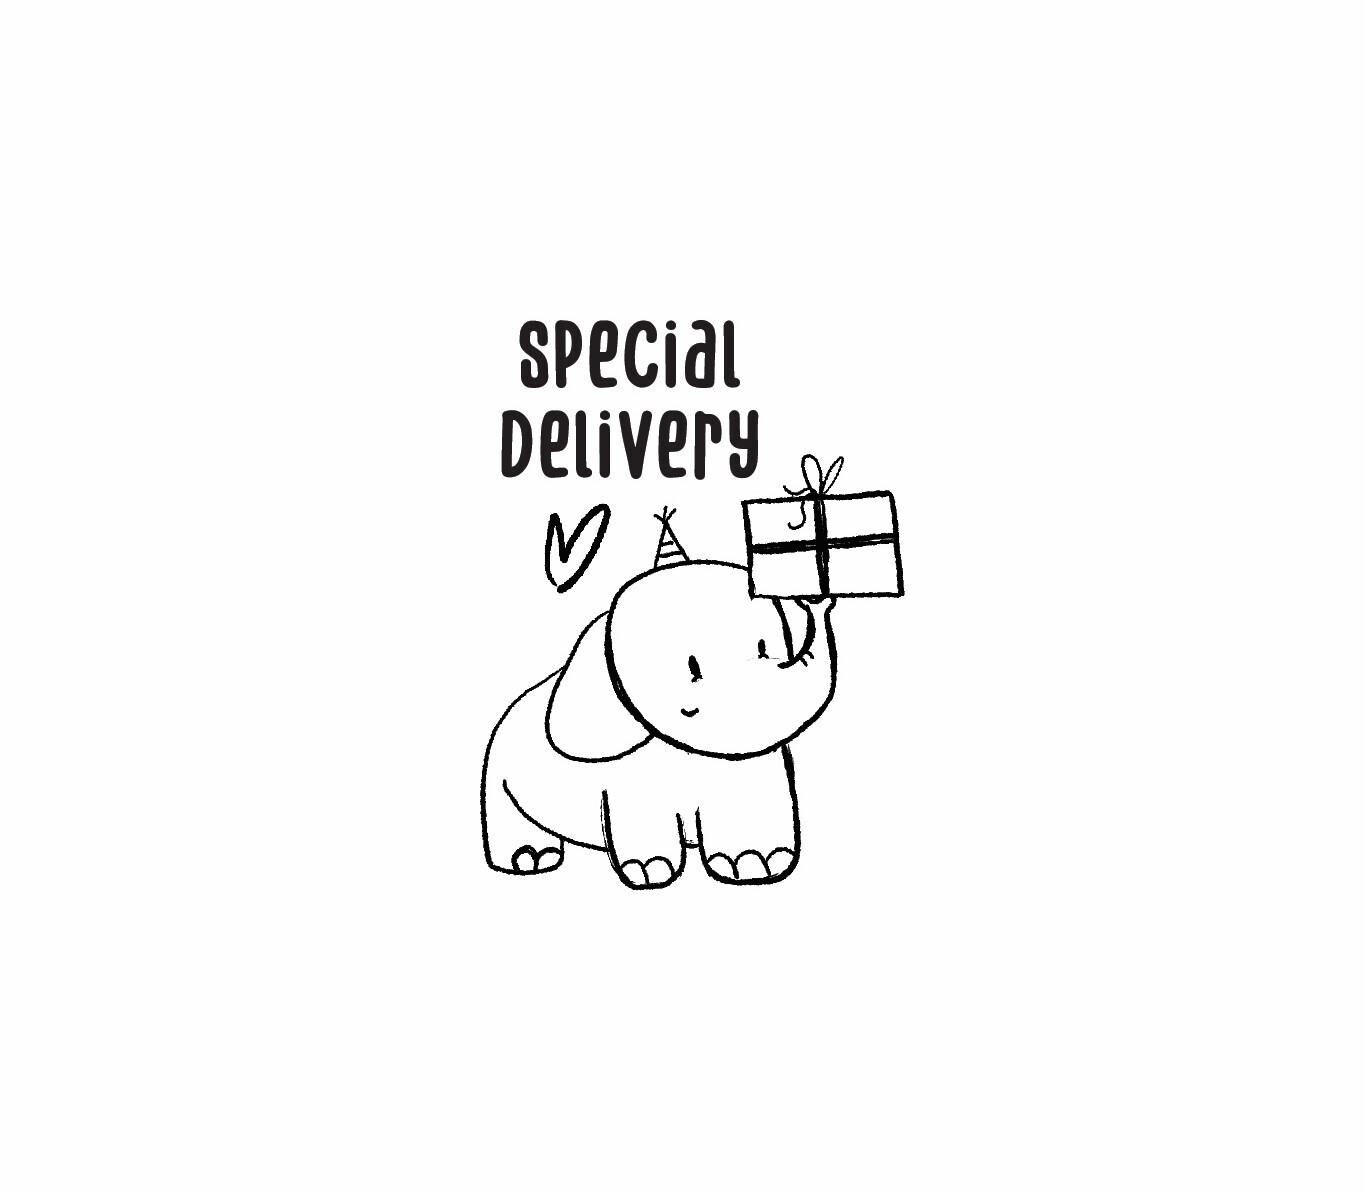 "Special Delivery" Rubber Stamp